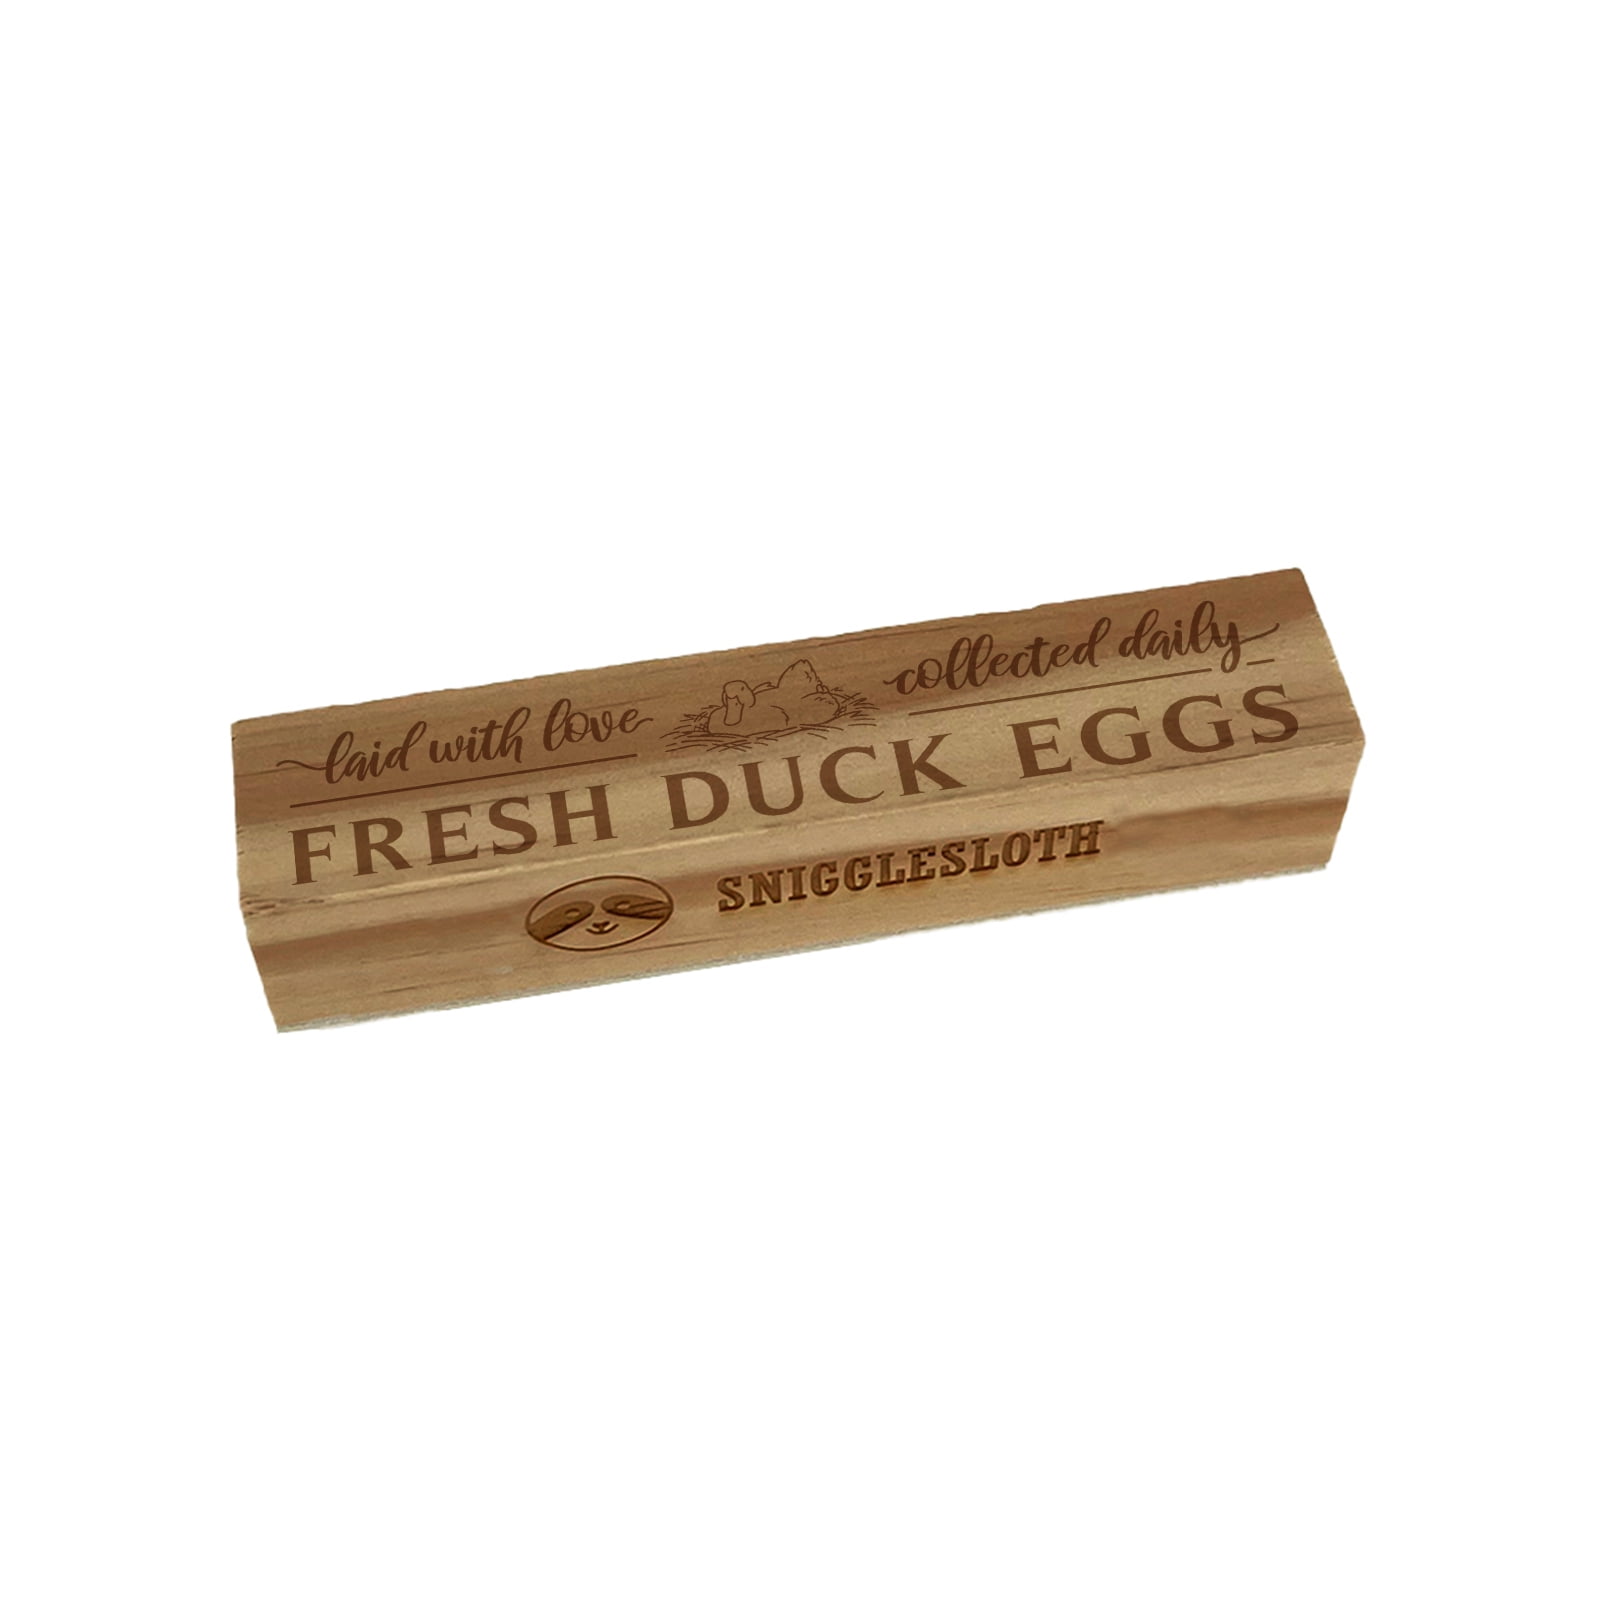 Fresh Duck Eggs Laid with Love Collected Daily Rectangle Rubber Stamp for Stamping Crafting 2.50in Small 